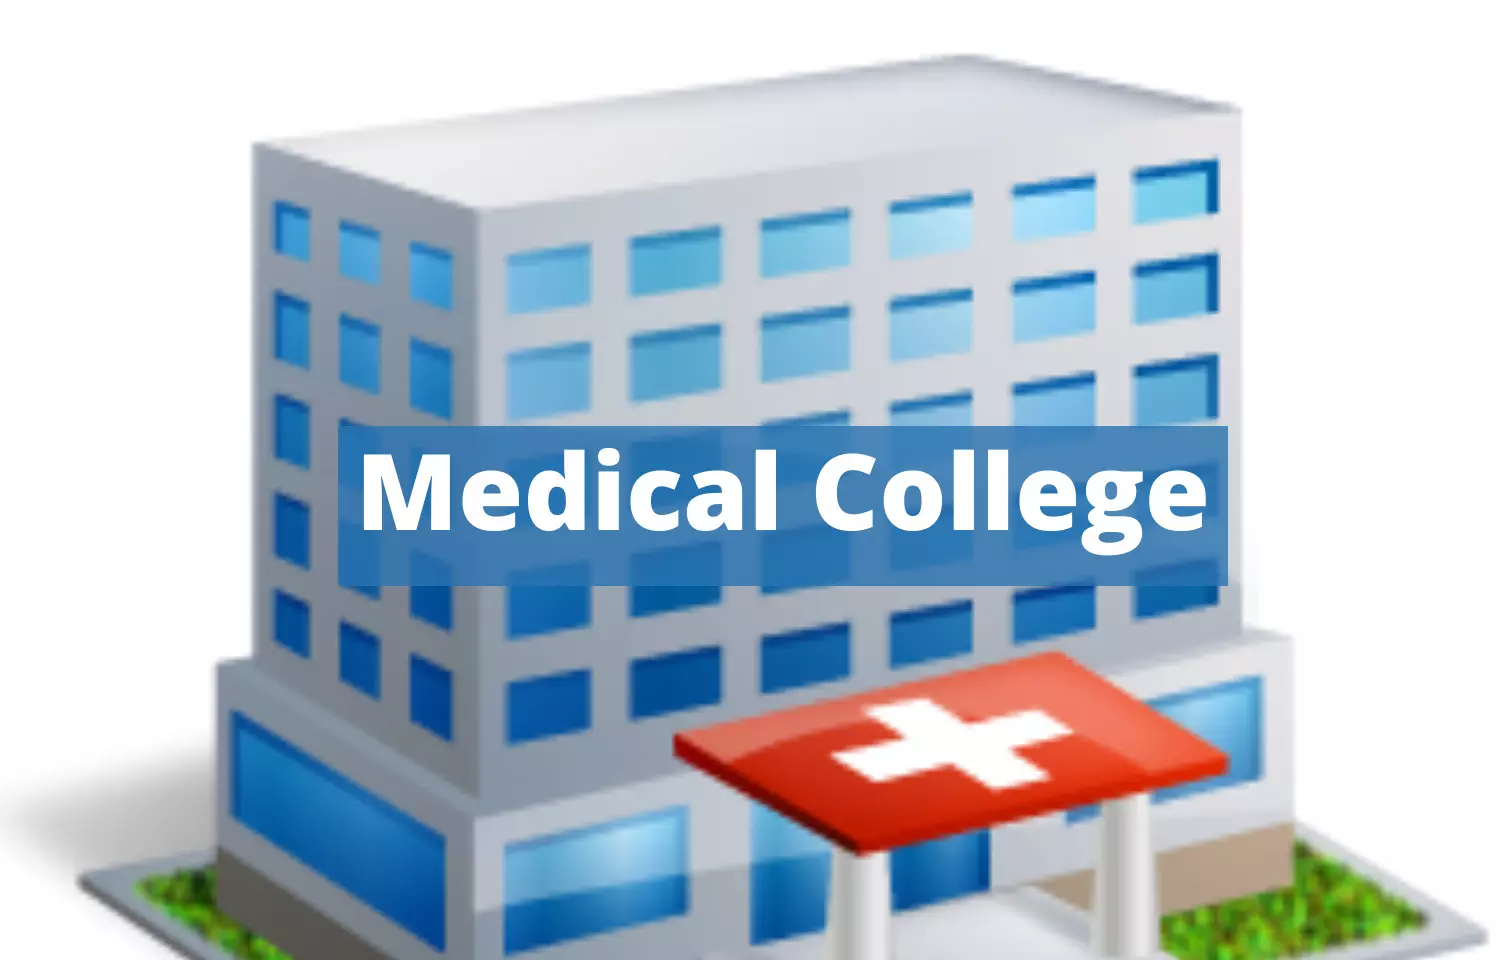 GMC Saran, Samastipur to come up in Bihar, MBBS admissions from next year